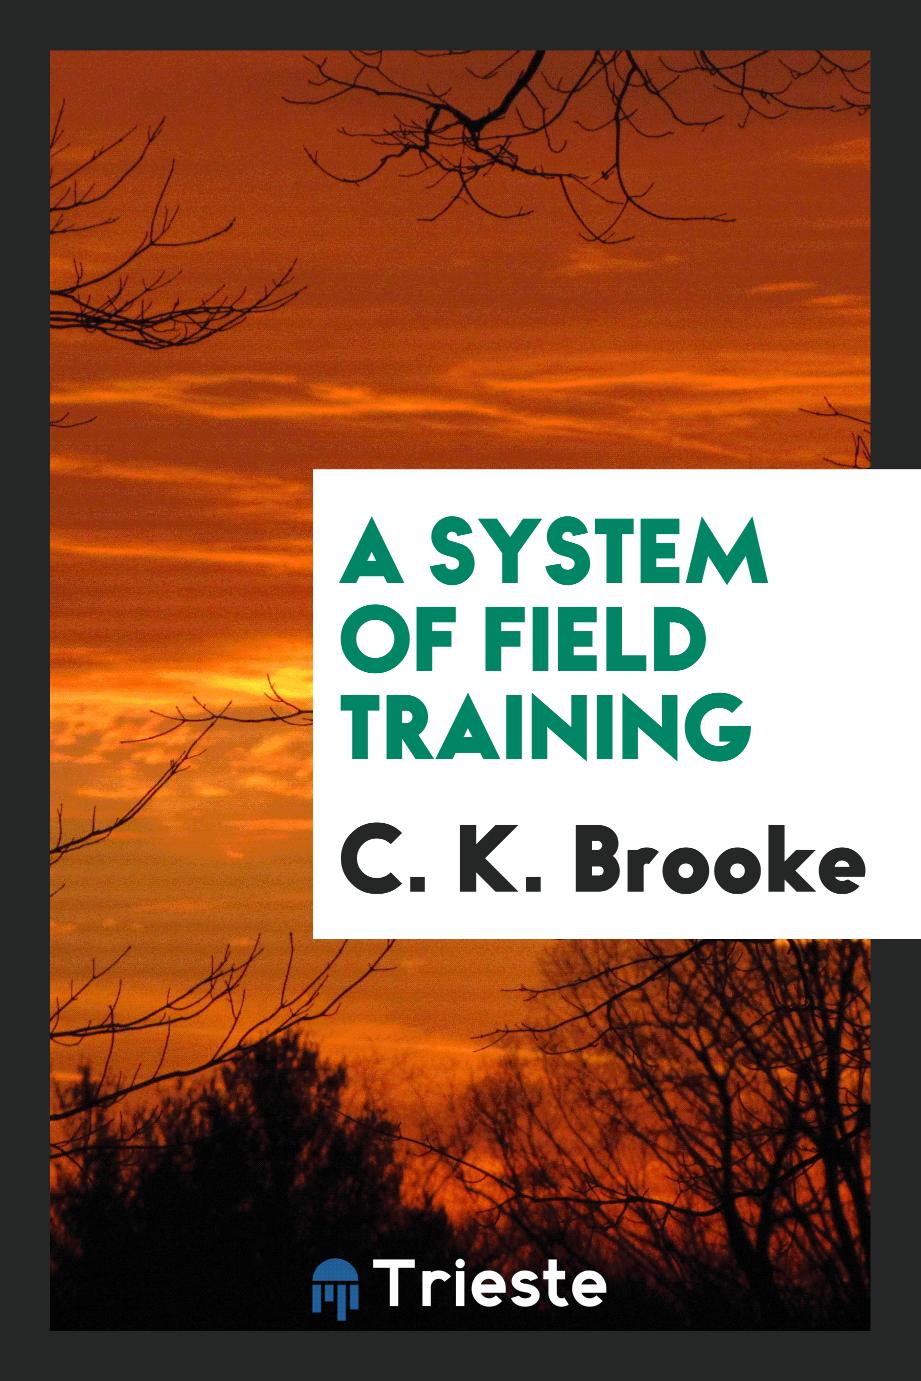 A System of Field Training